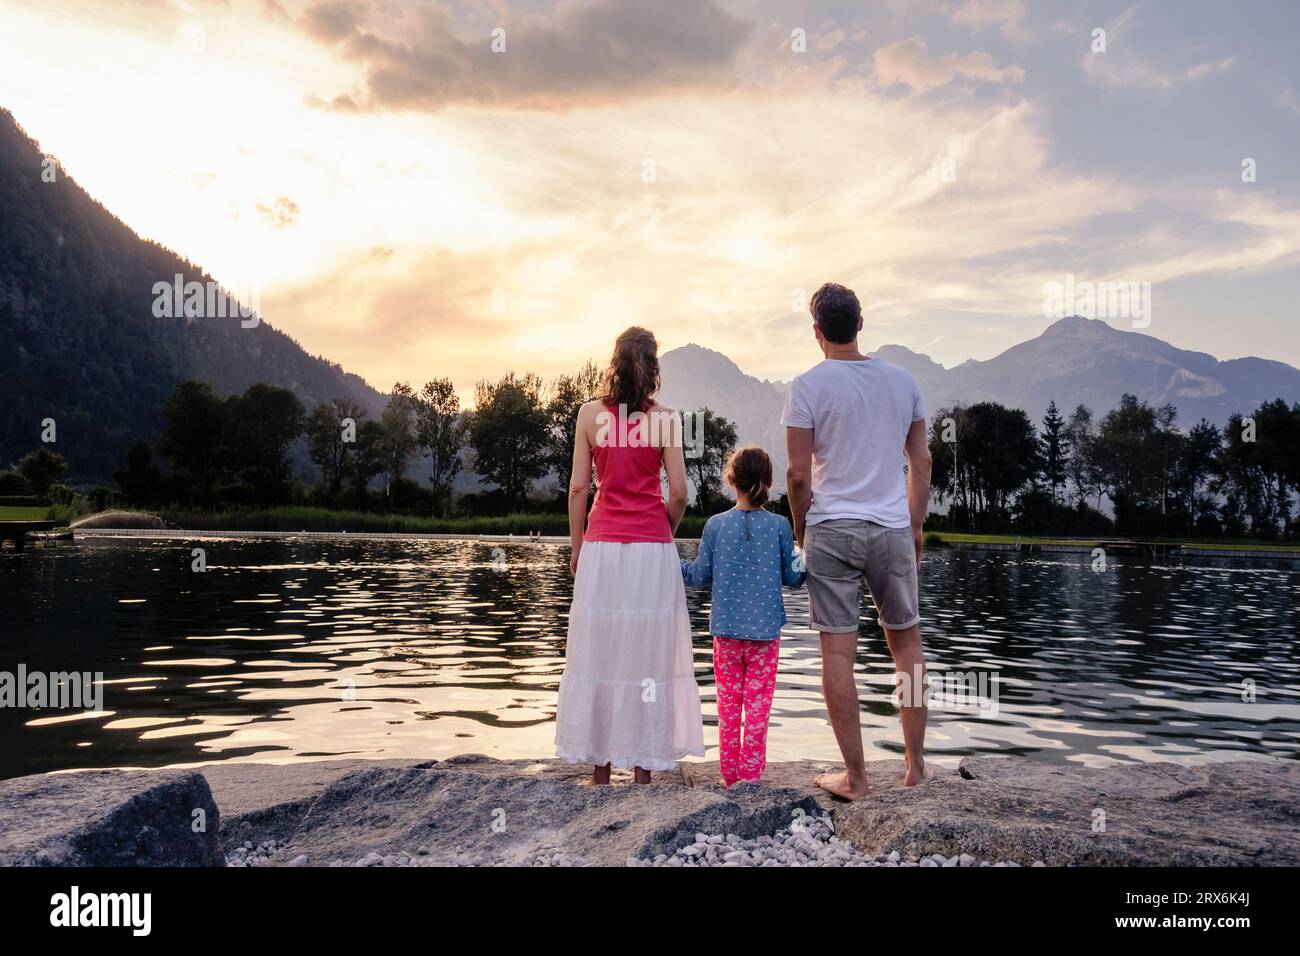 Family admiring lake and mountains at sunset Stock Photo